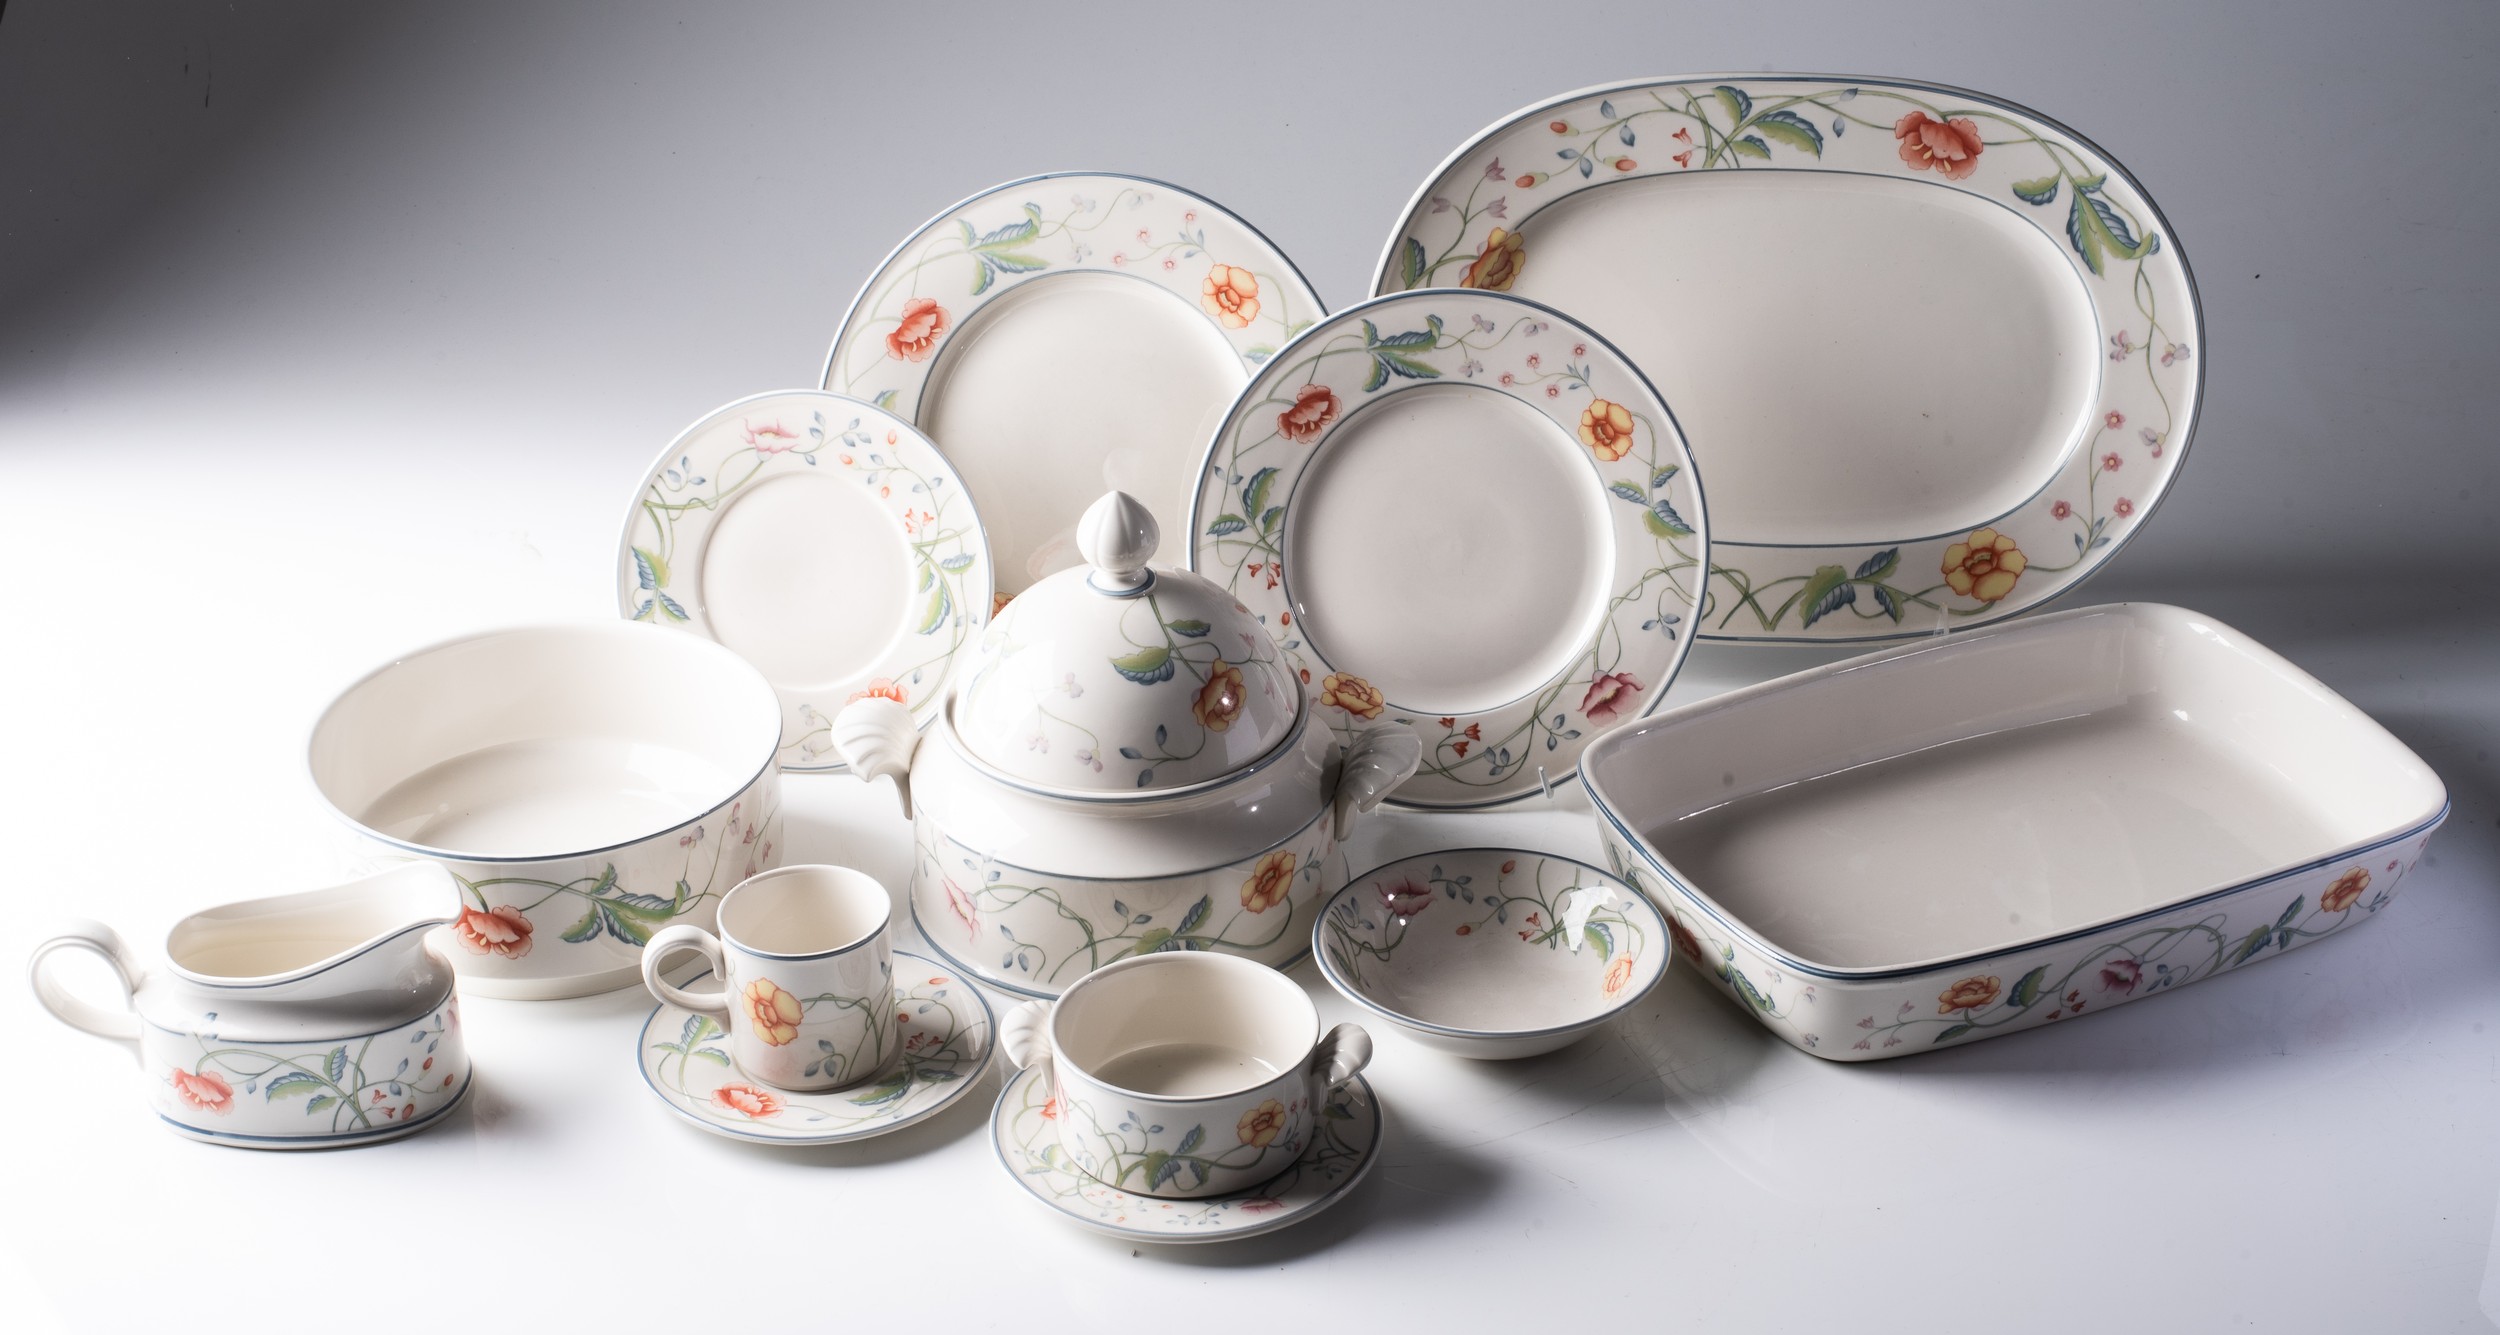 A VILLEROY AND BOCH "ALBERTINA" DINNER SERVICE Comprising: 8 meat plates, 8 fish plates, 8 soup